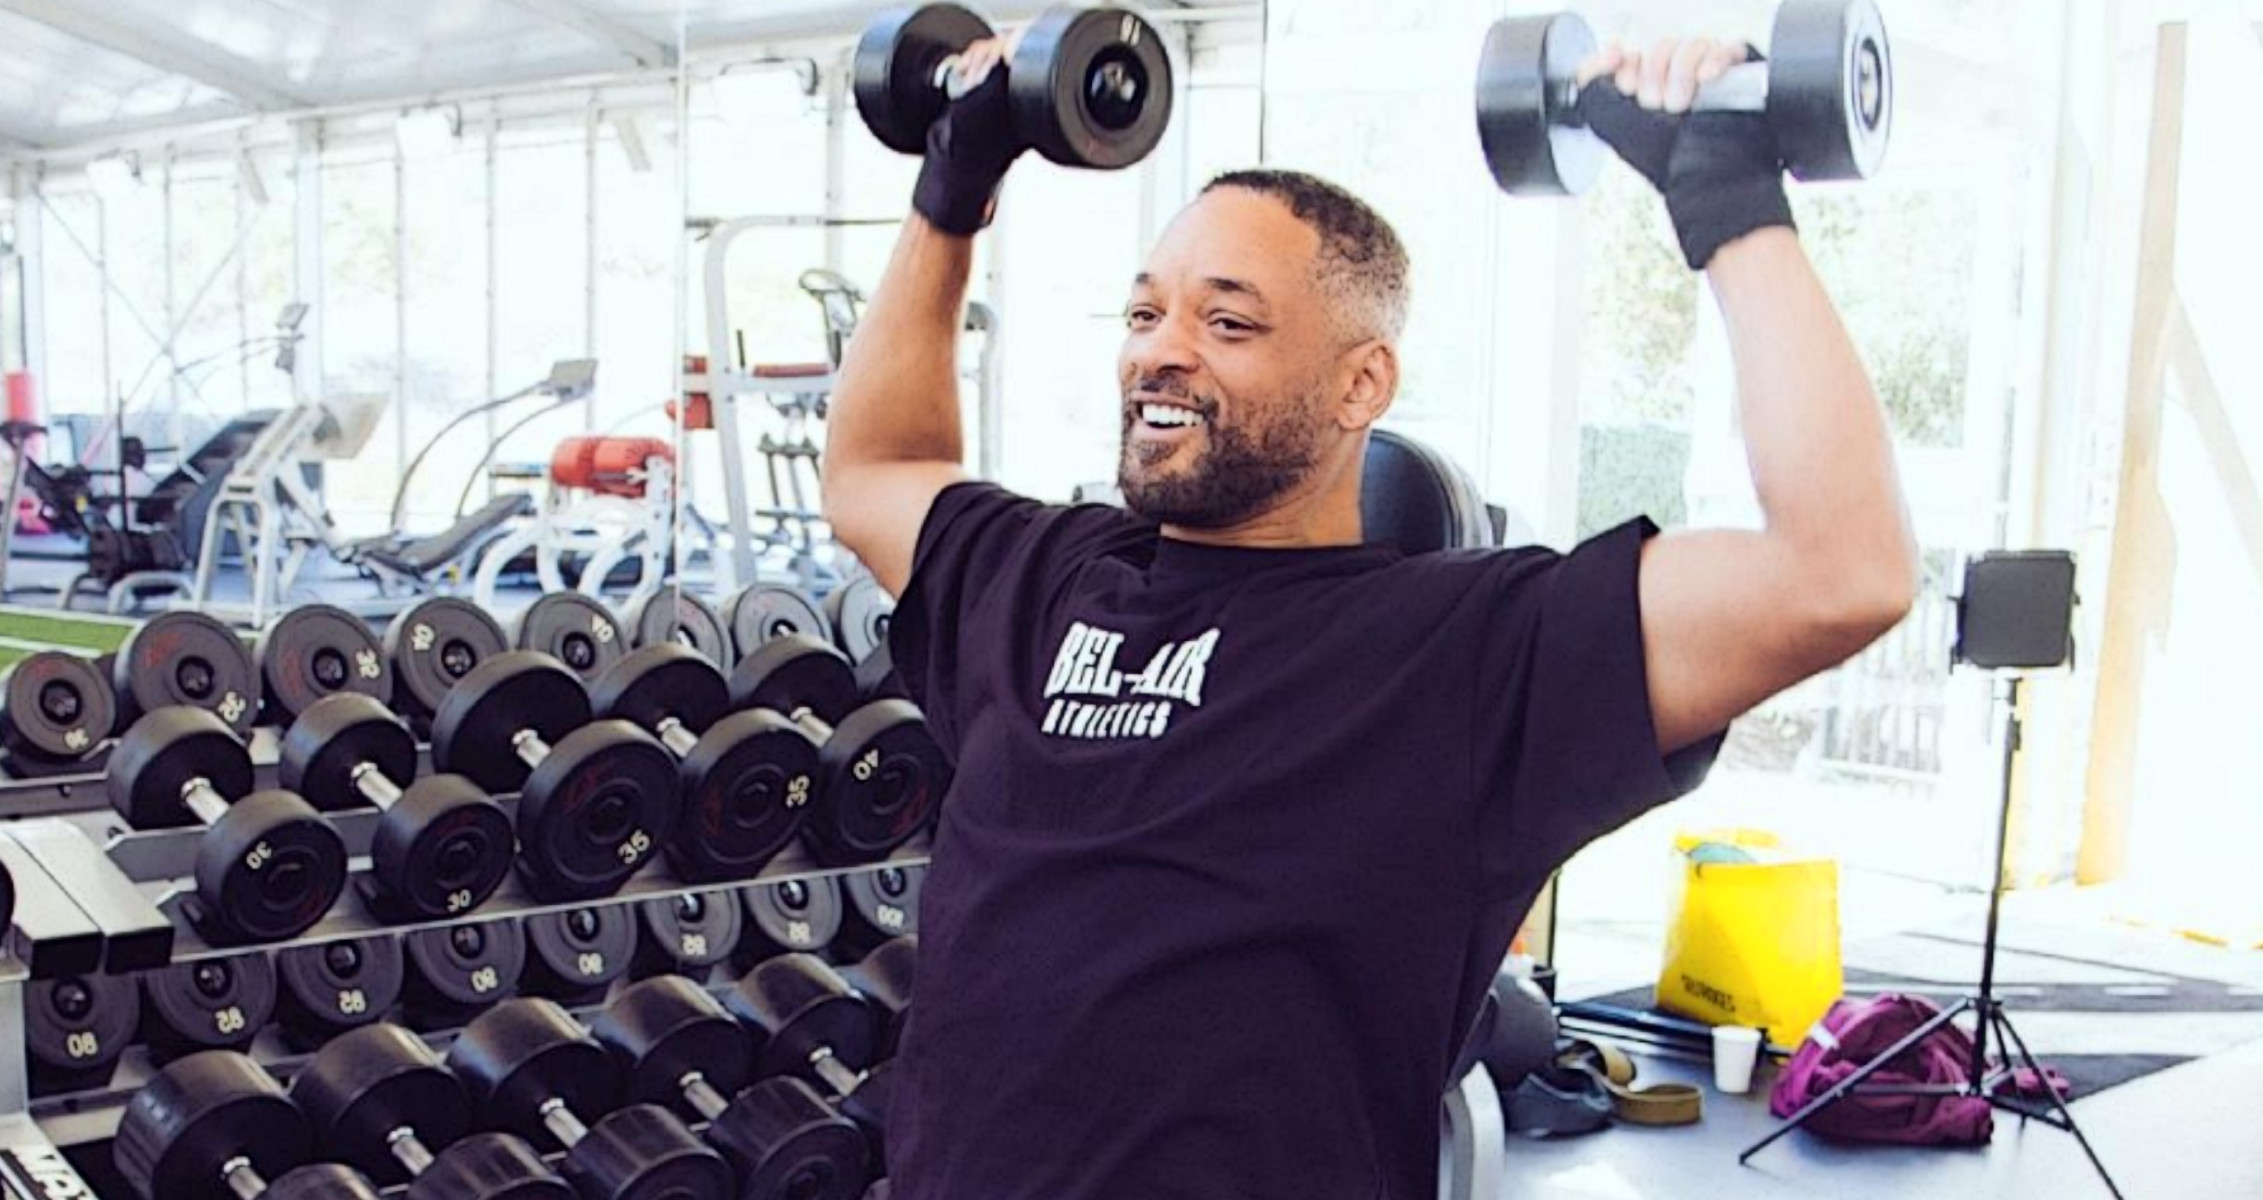 Will Smith Begins His Fitness Challenge and Gets Embarrassed